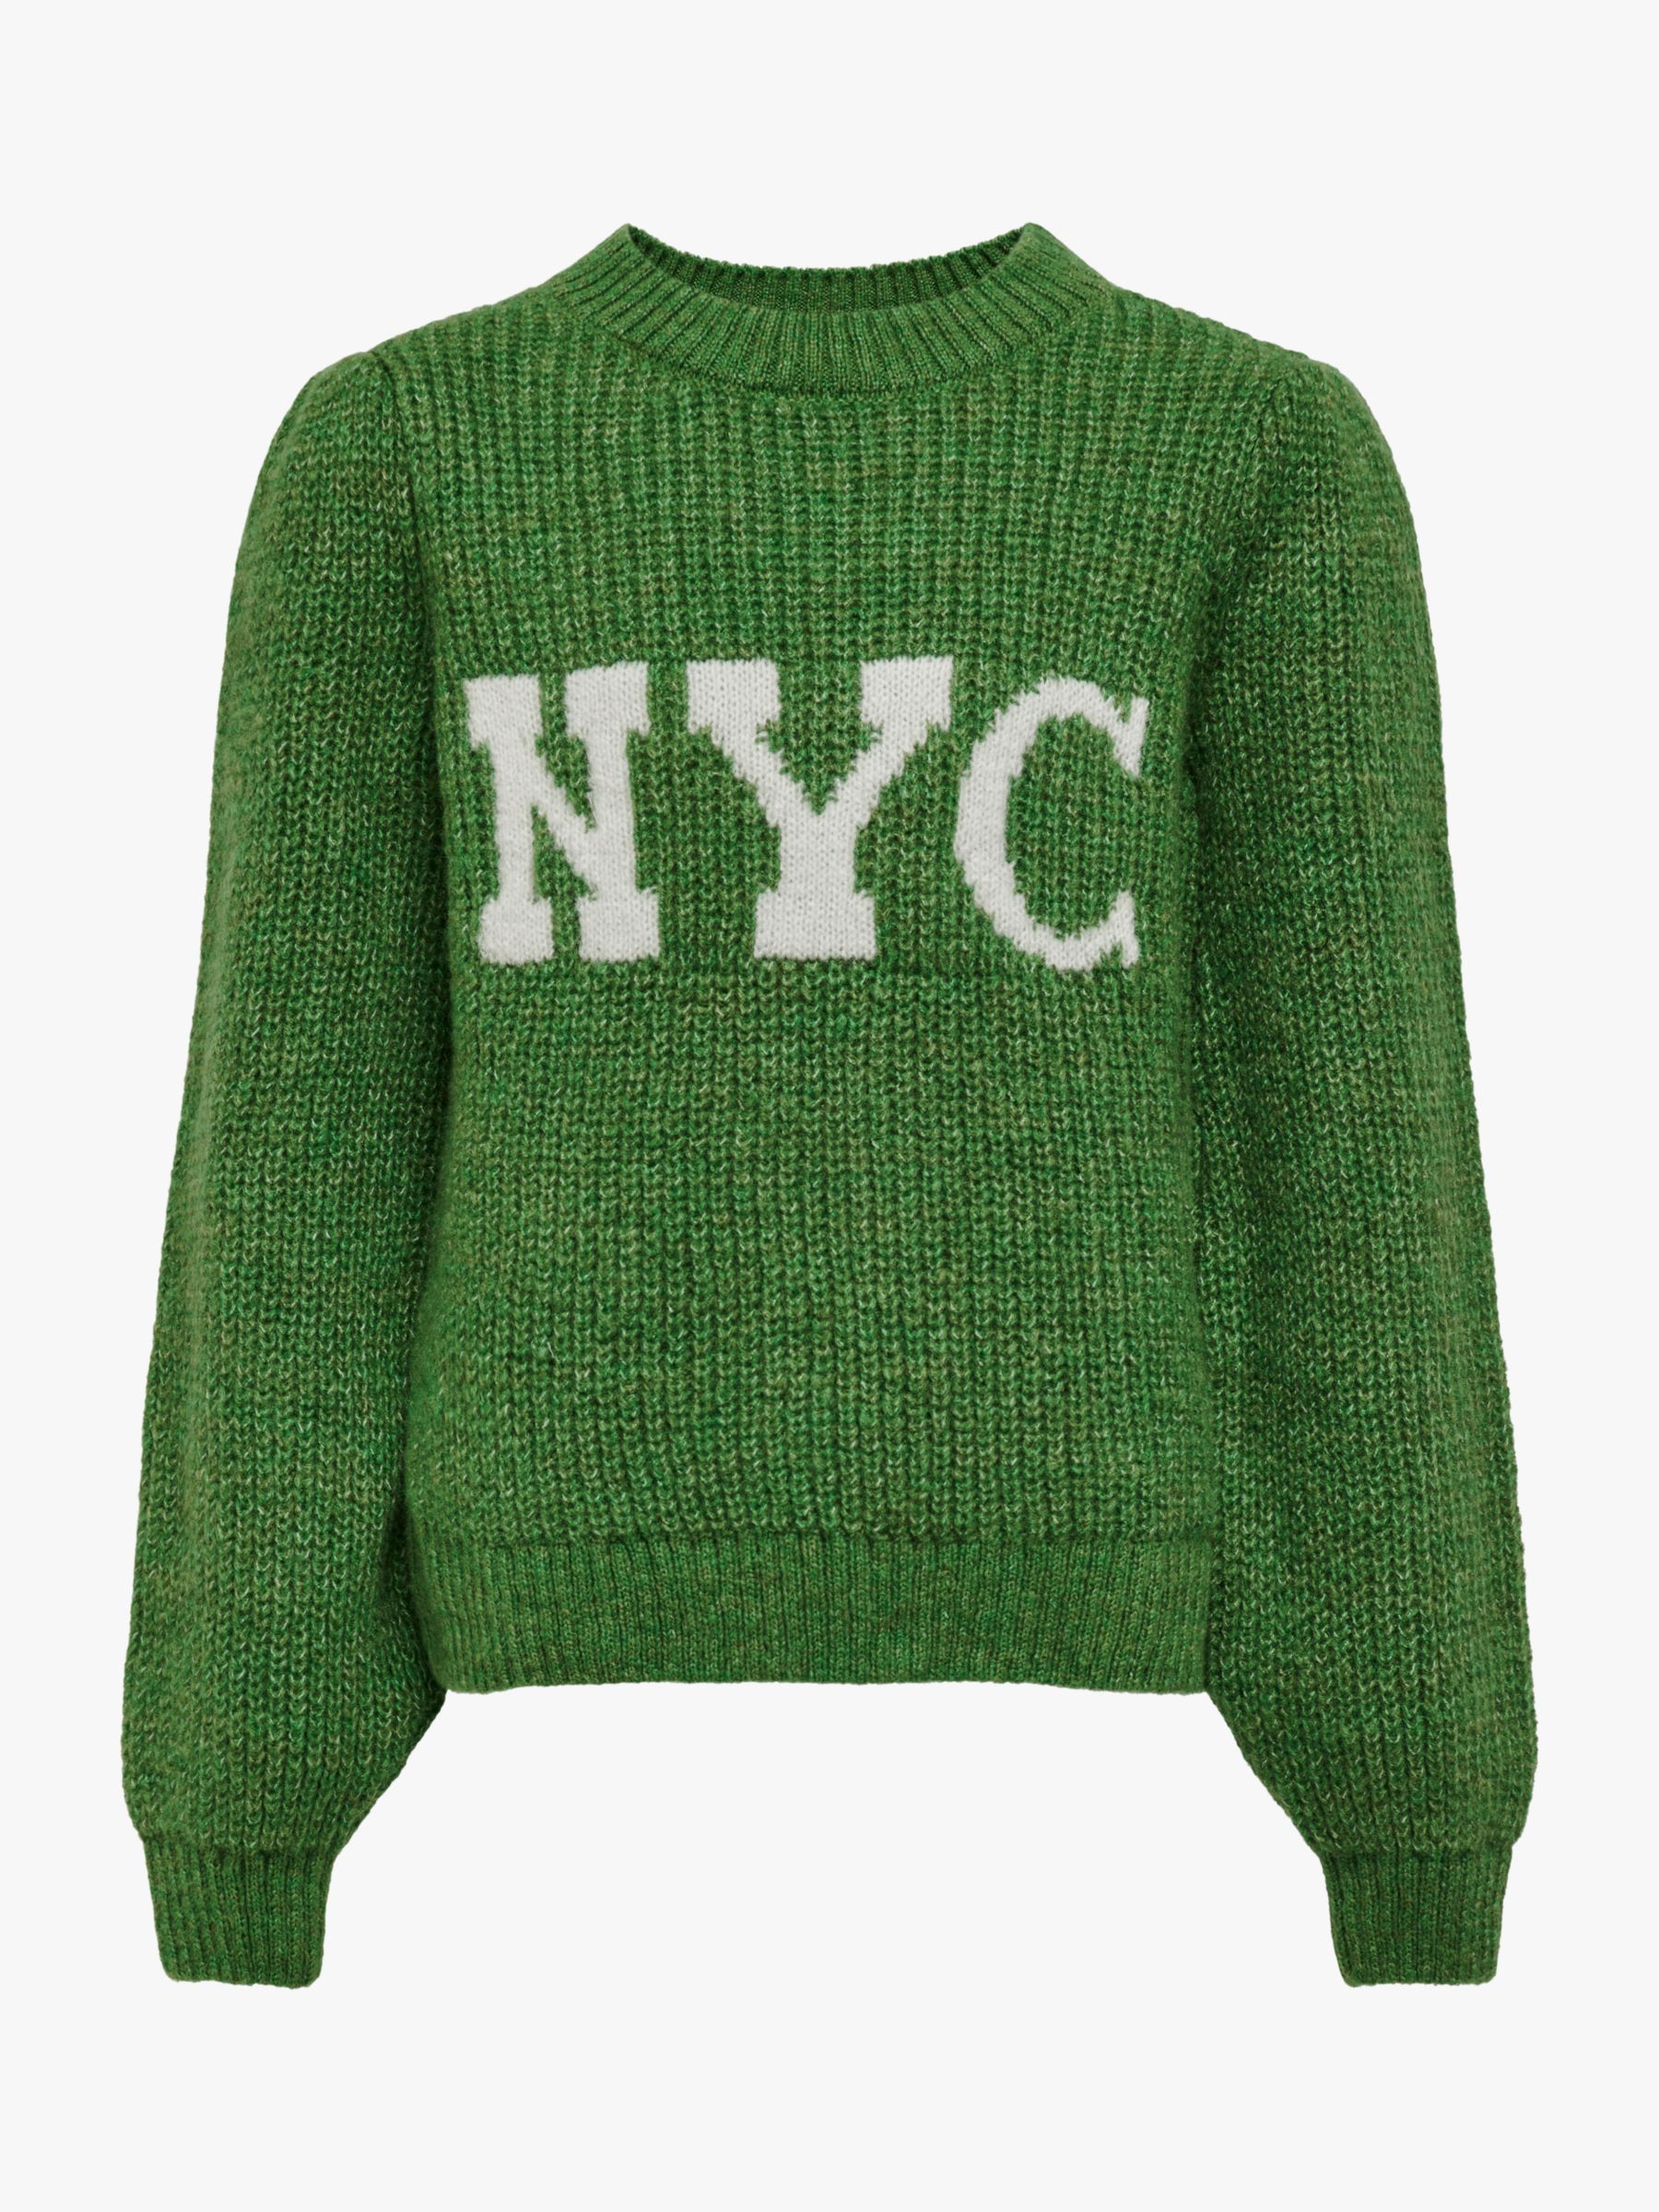 Kids ONLY Kids' NYC Knitted Jumper, Green, 9-10 years